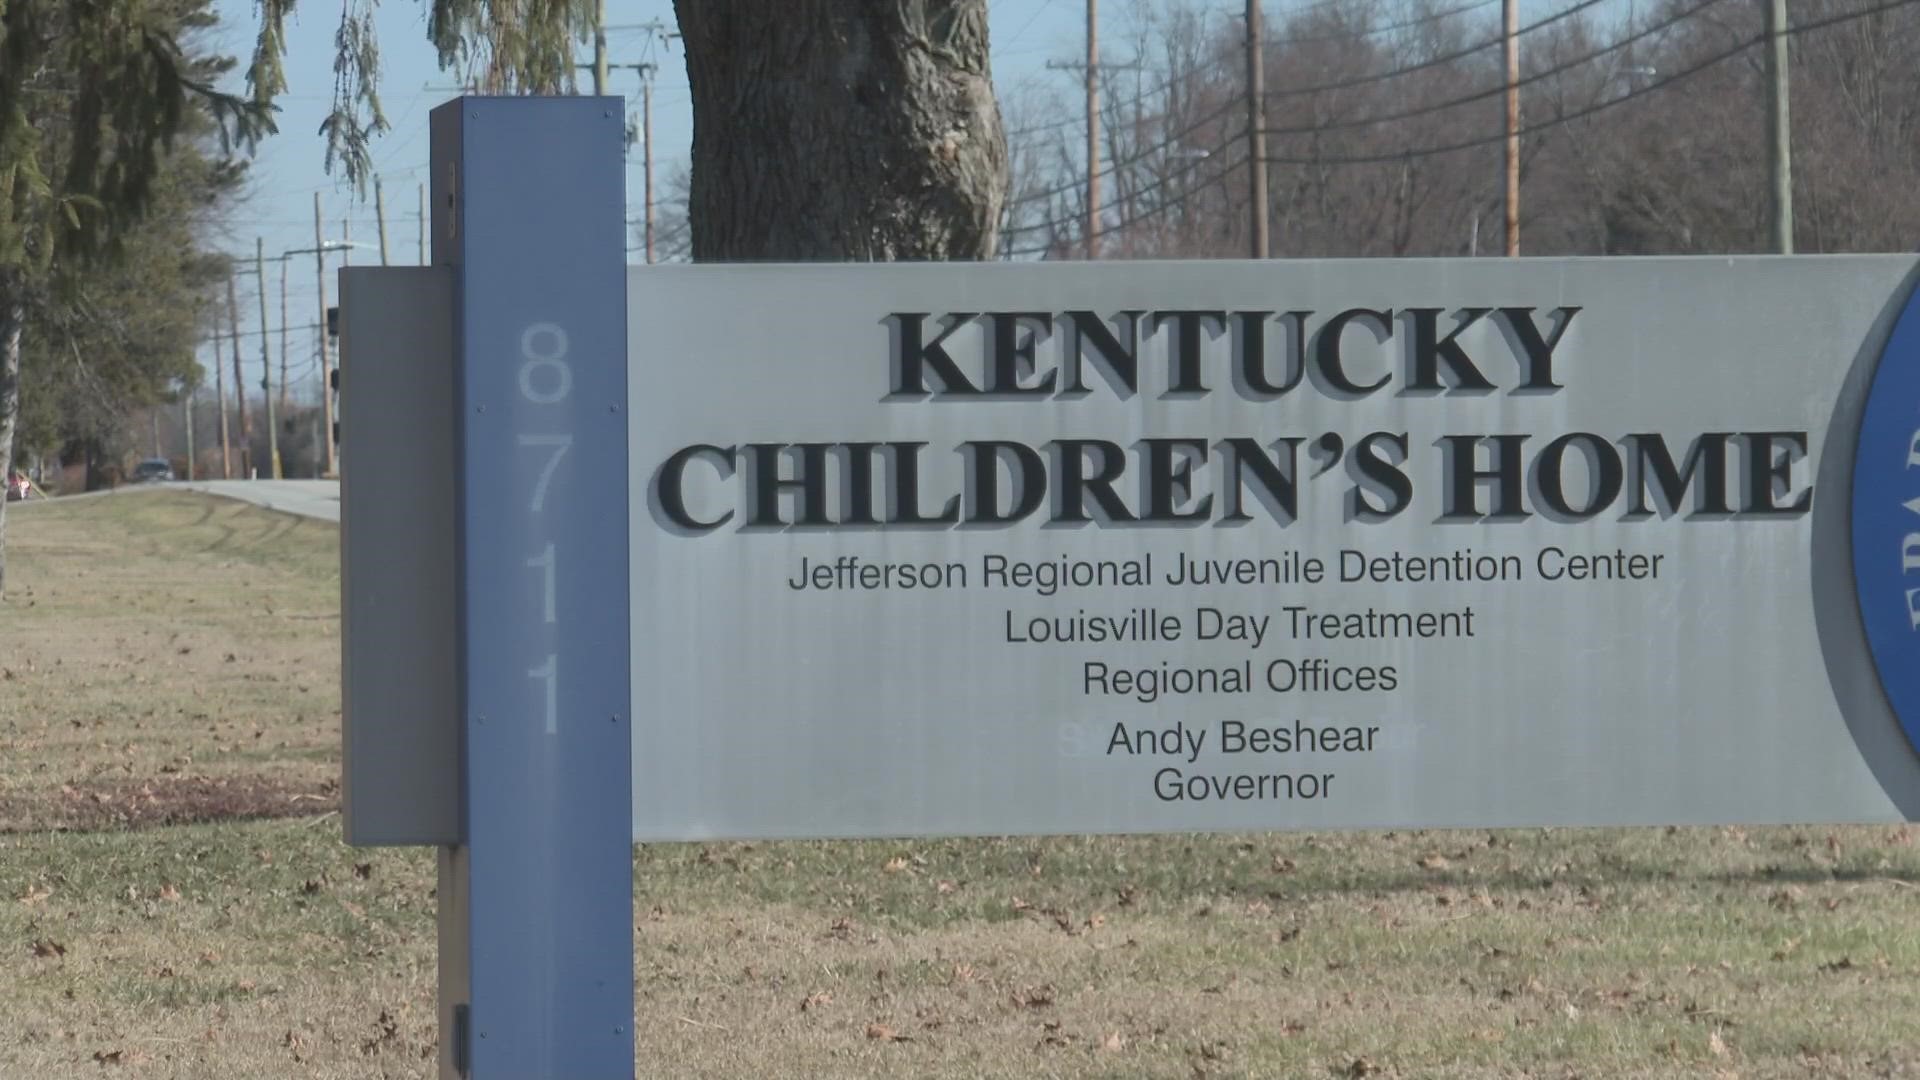 Kentucky juvenile justice officials themselves have called the system outdated and in need of an overhaul.